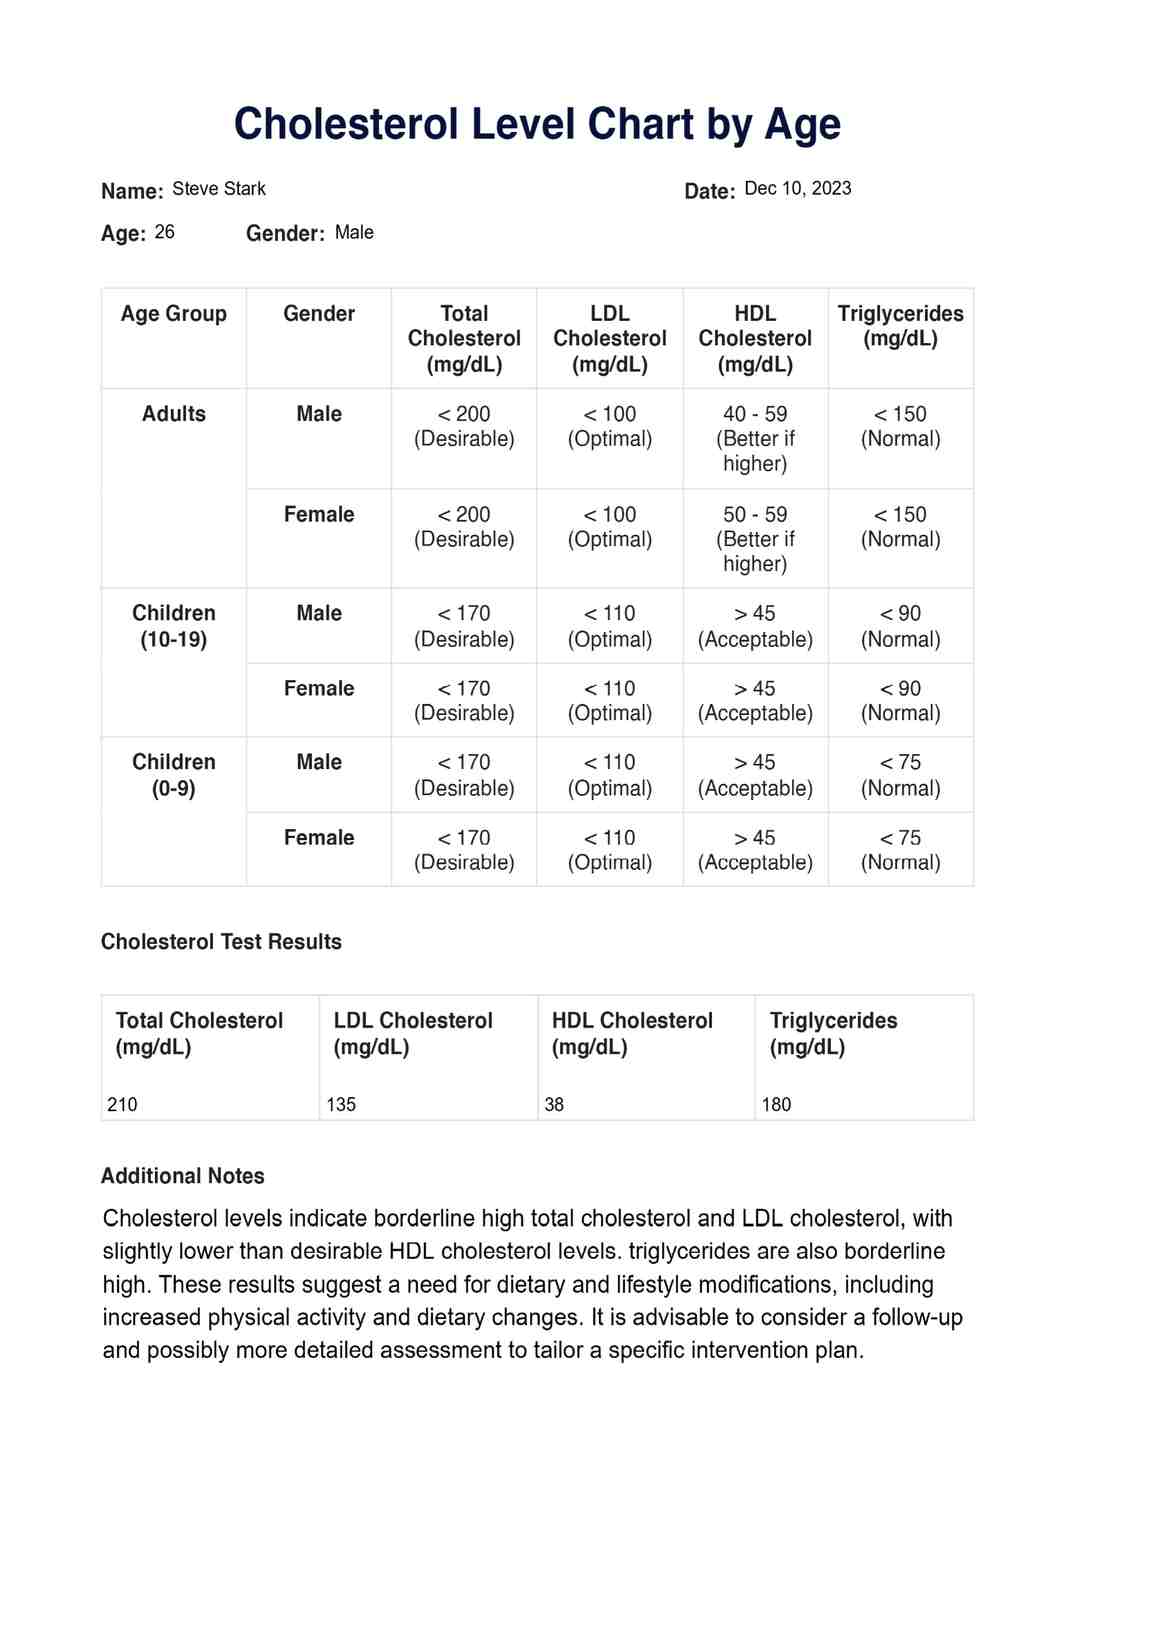 Cholesterol level chart by age PDF Example